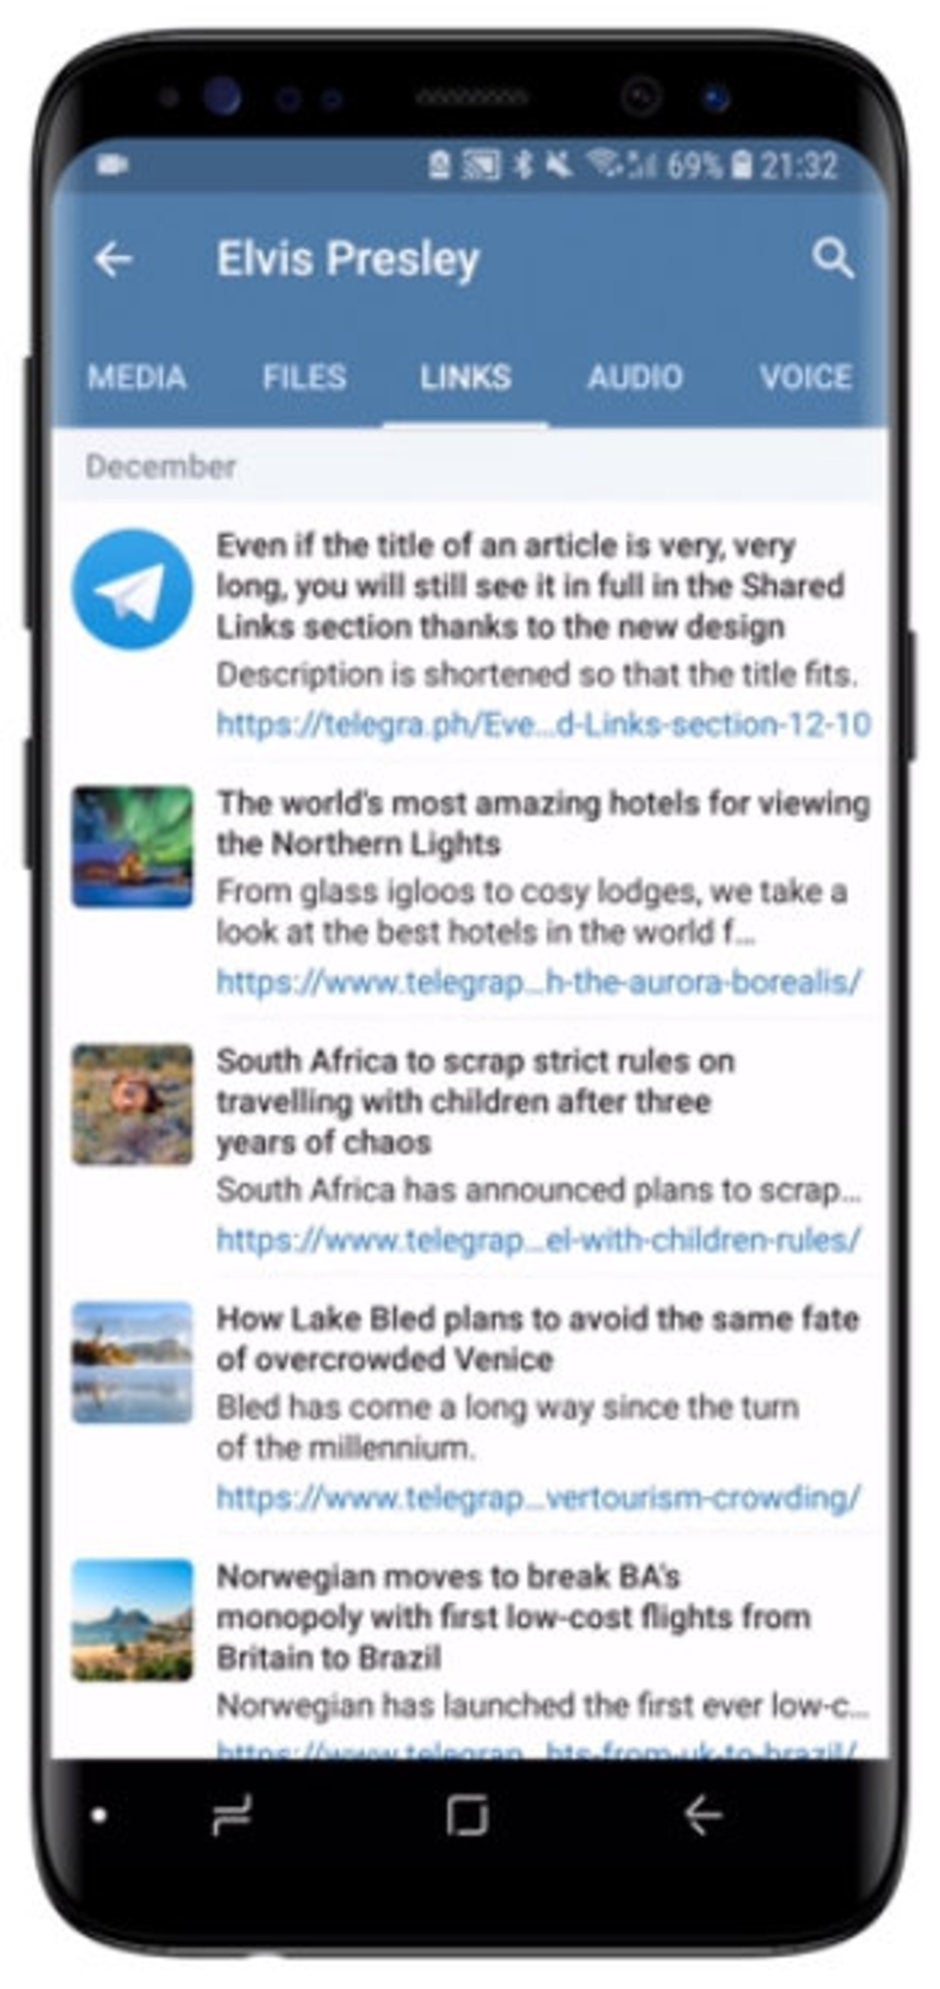 New design for Android - Telegram version 5.0 released with new design, new features galore